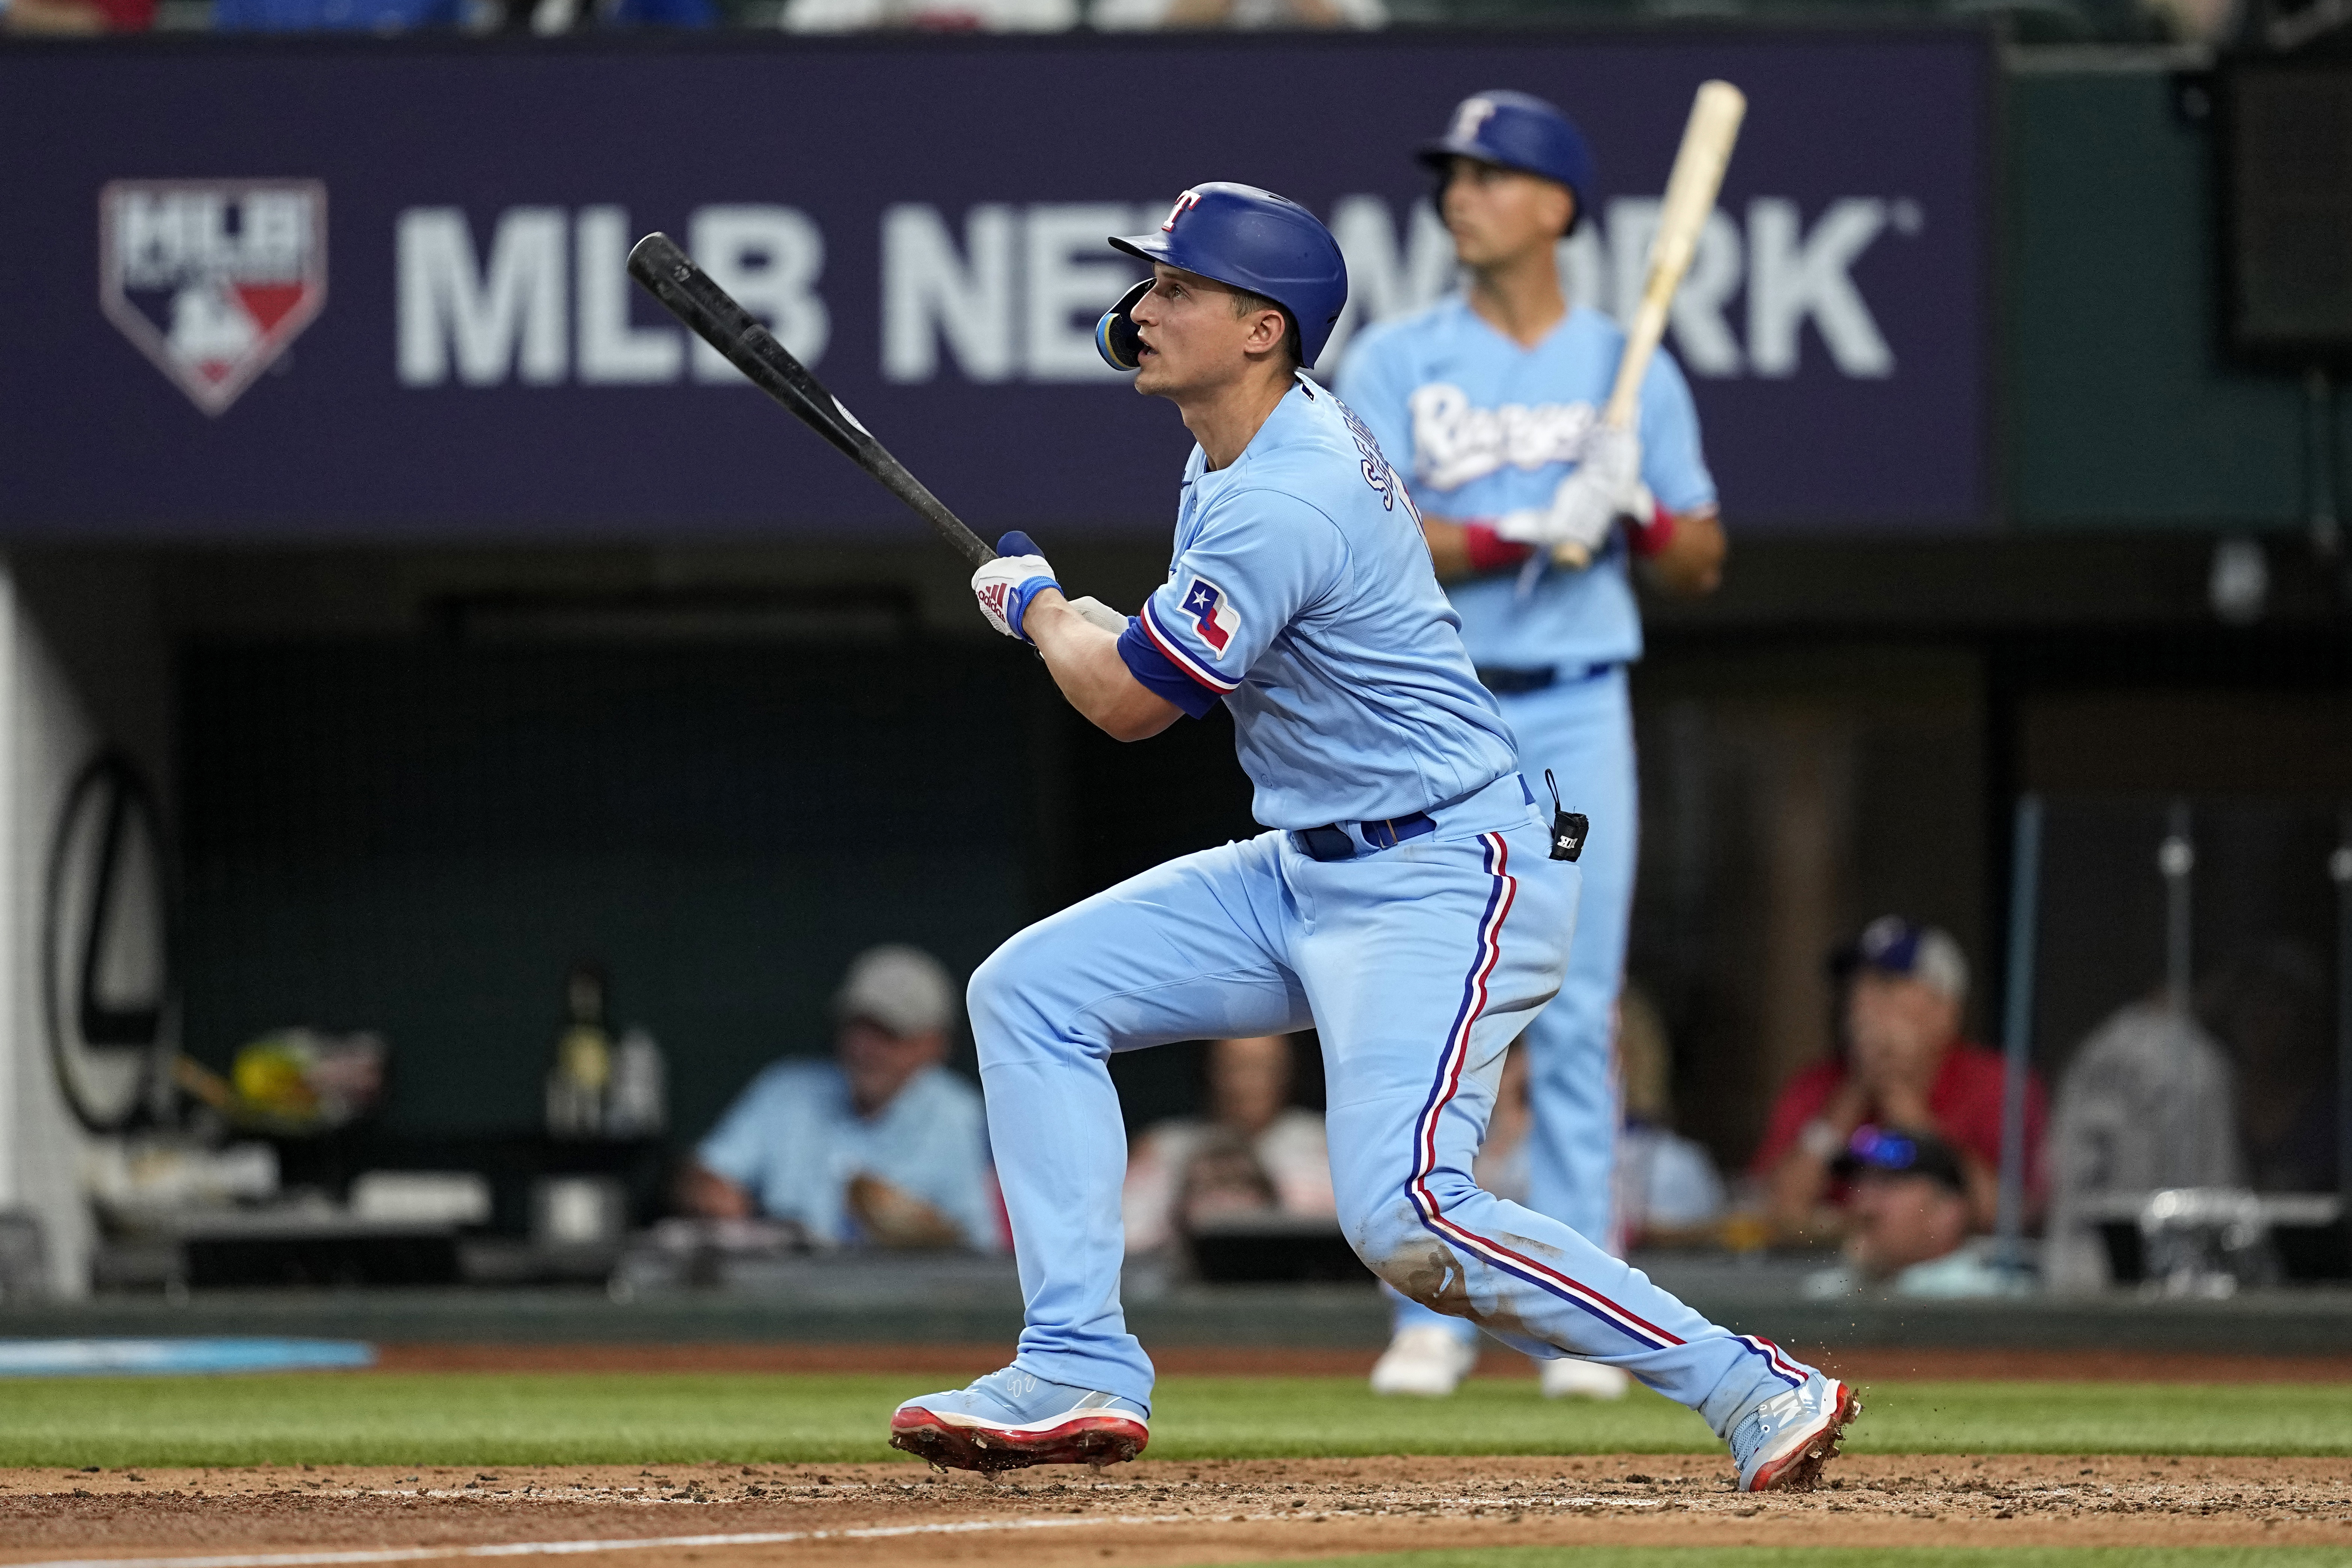 Rangers' honors continue as Corey Seager earns AL Player of the Week